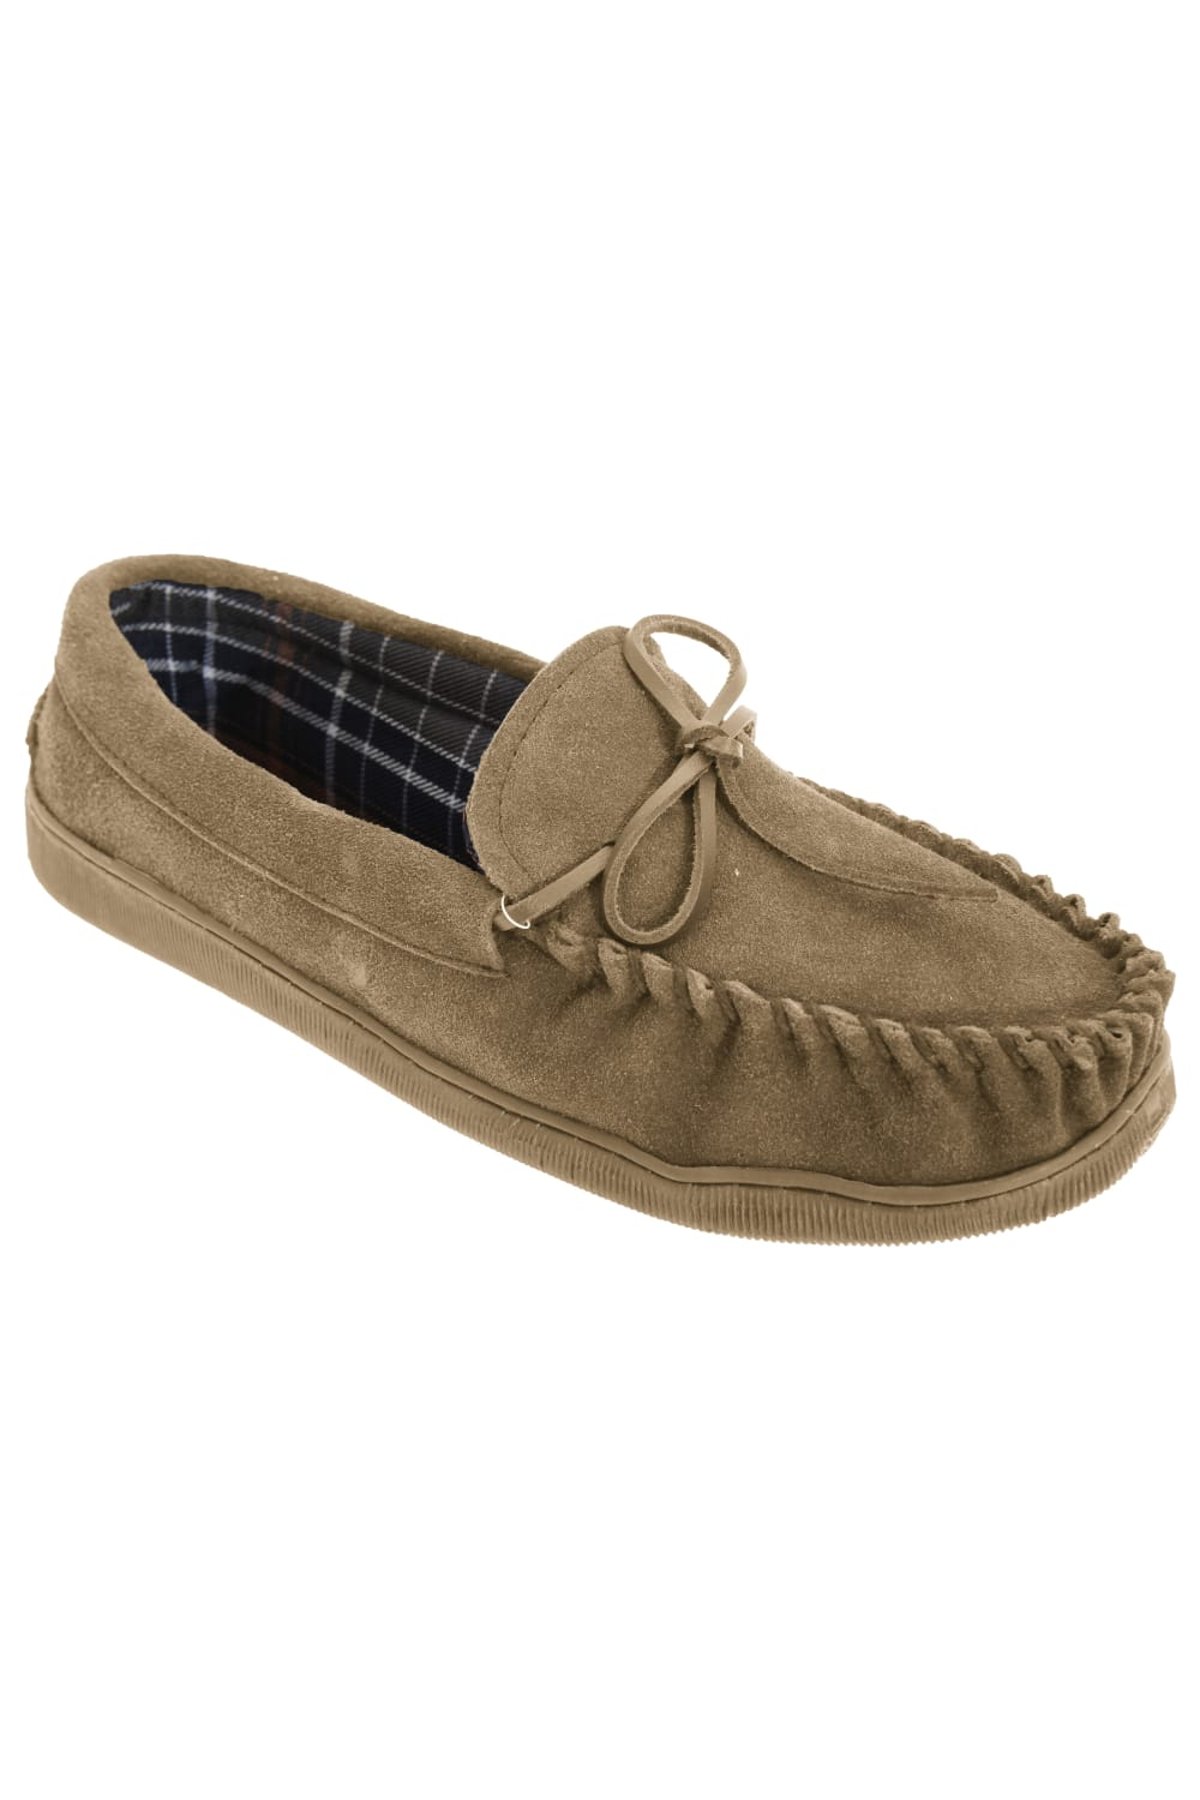 Sleepers ADIE MS461 Leather Full Indoor Quality Moccasin Slippers Sand Real Sued 